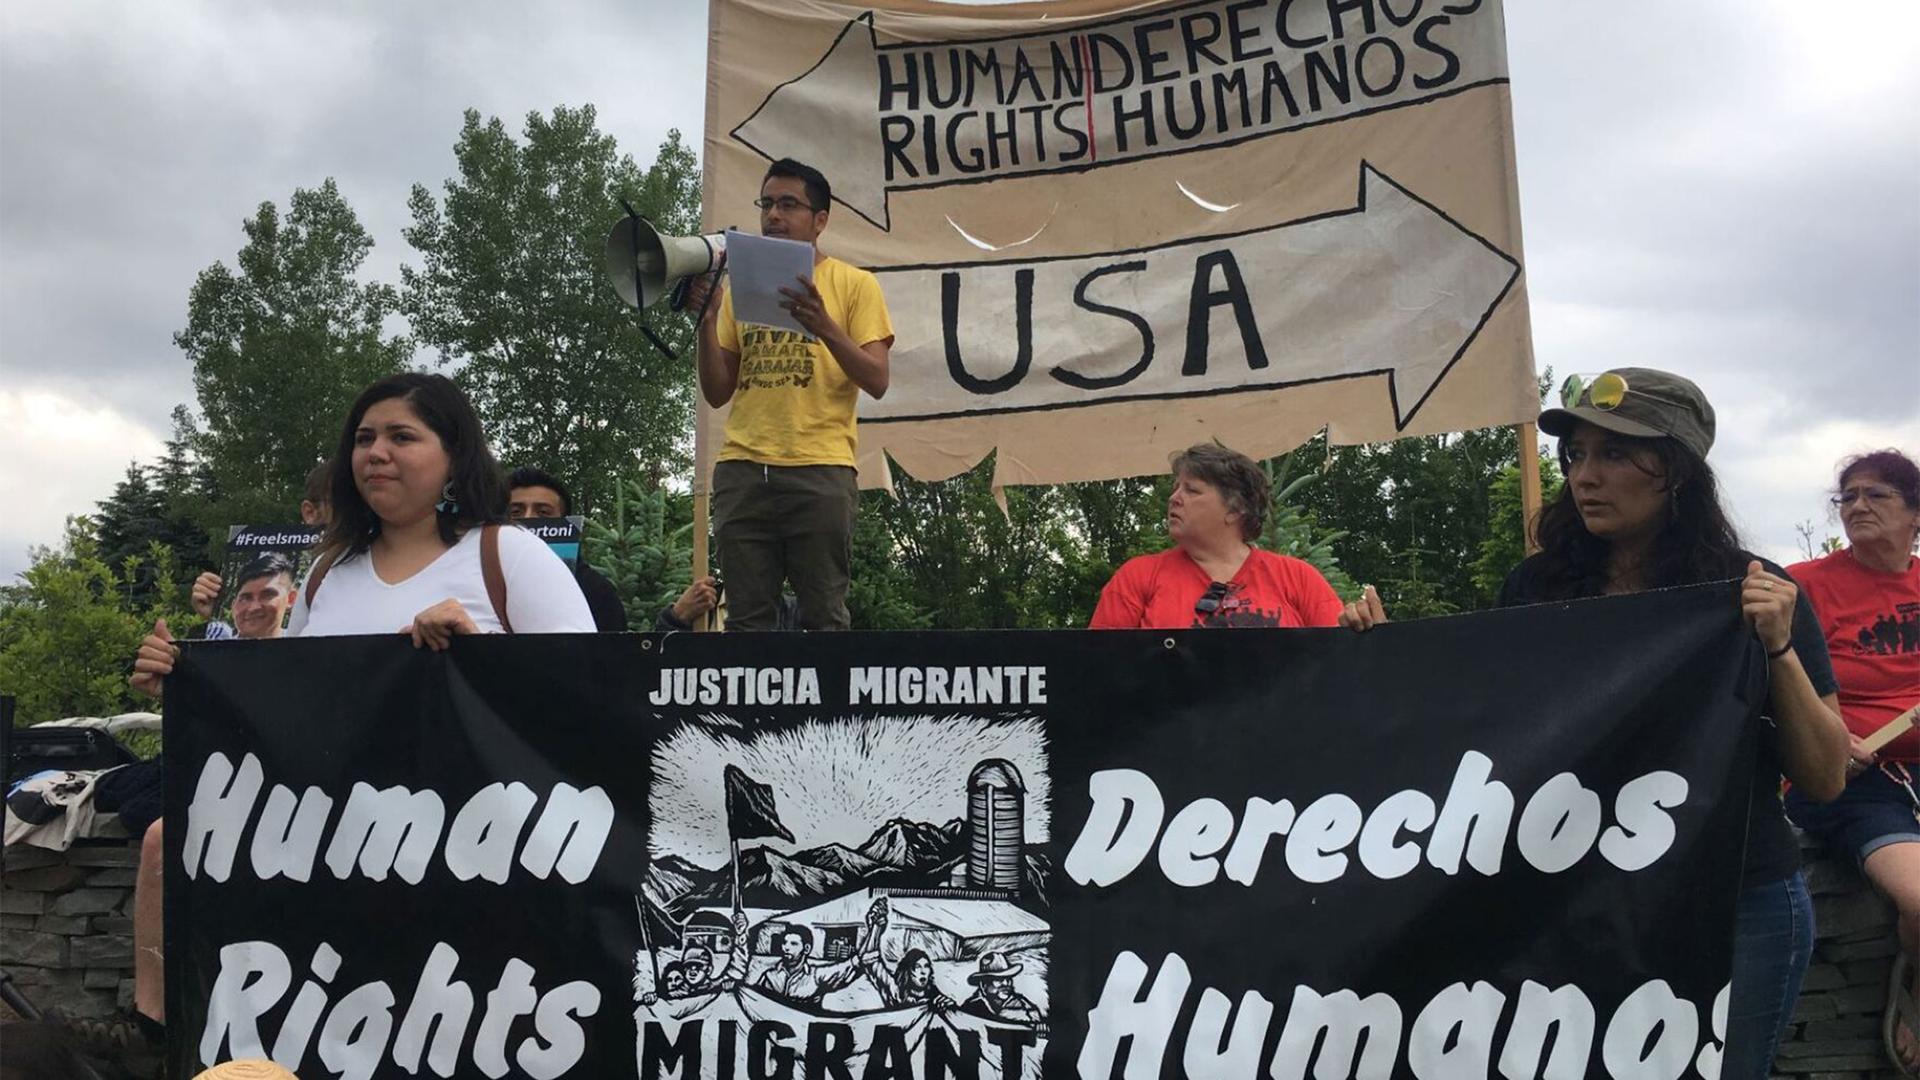 Dozens of people turned out at a rally in Newport in June of 2019 to protest the detention of three migrant farmworkers there